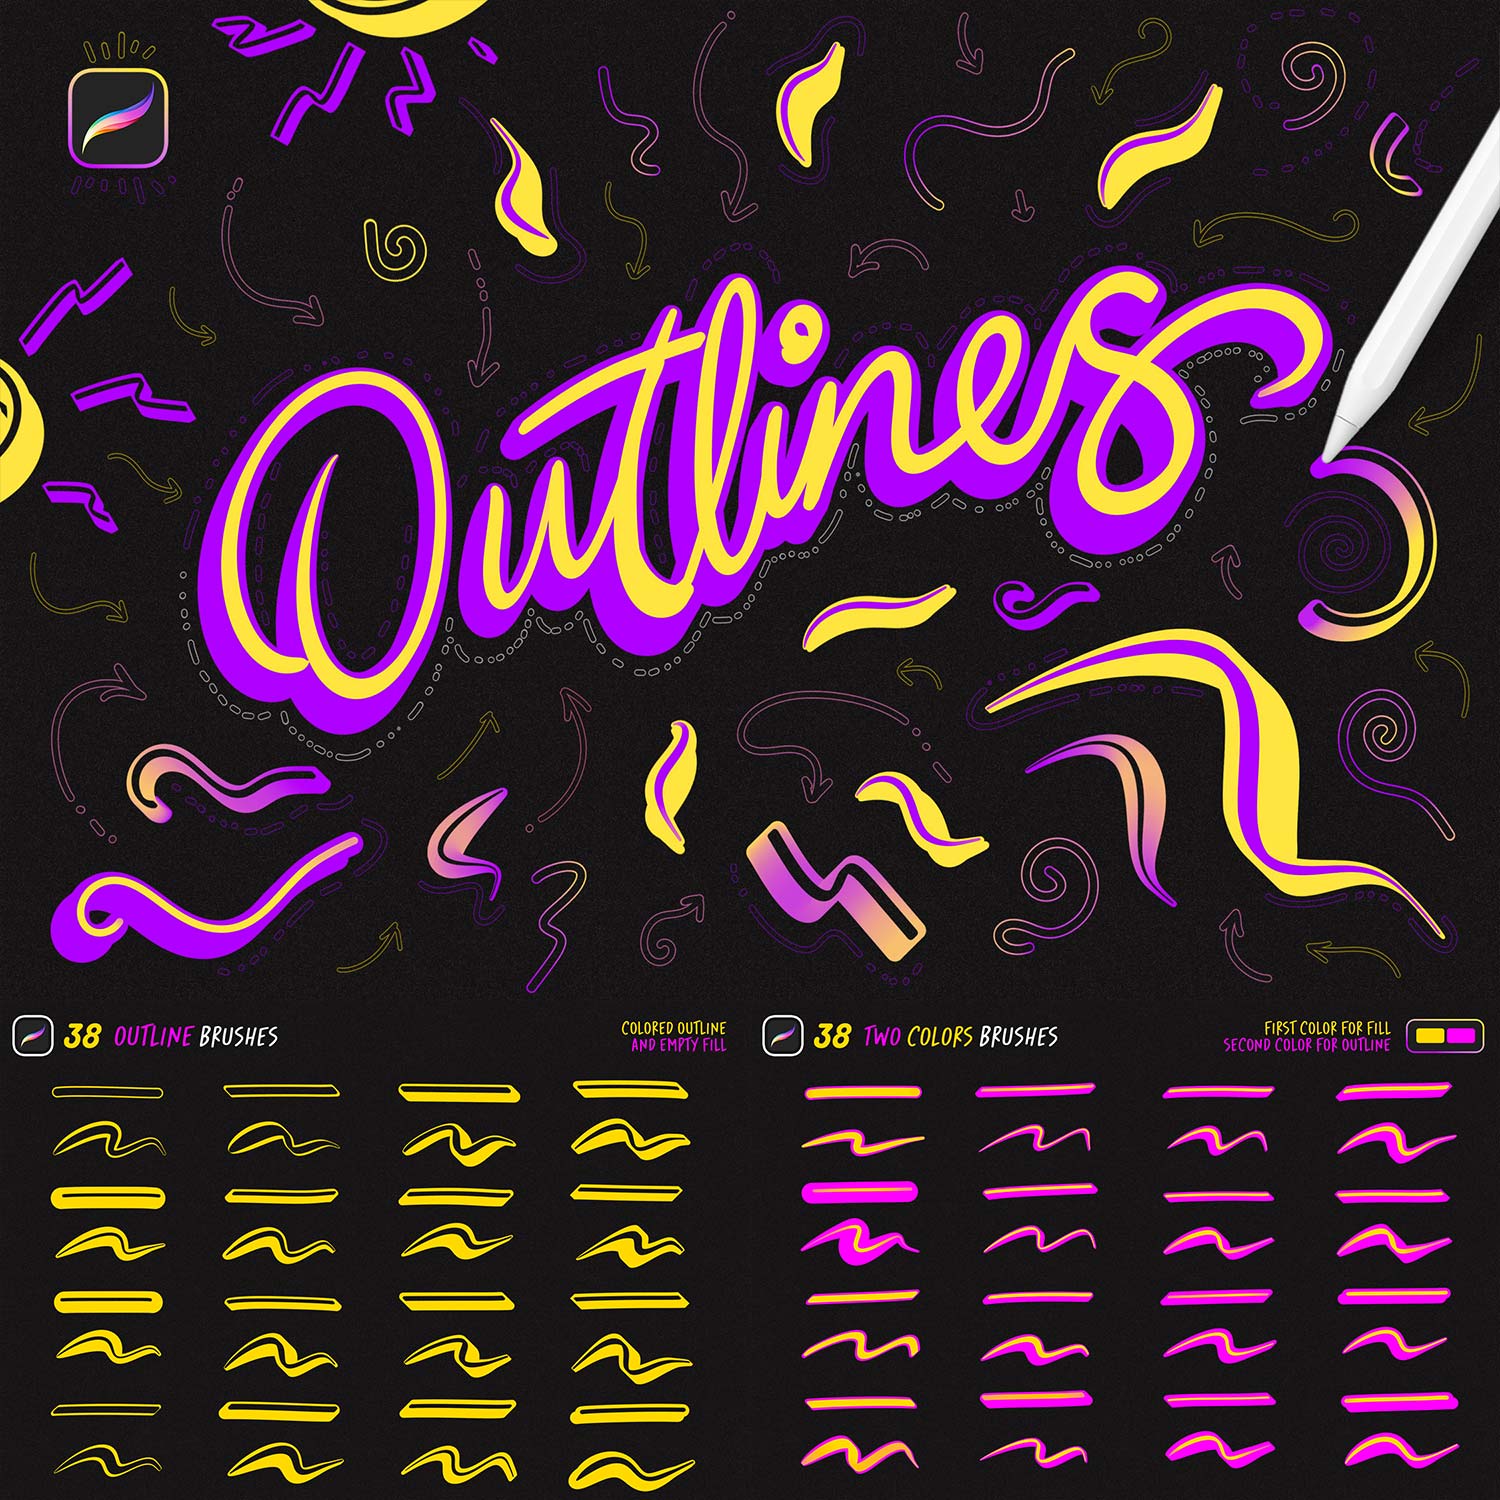 Outline Procreate Brushes preview image.